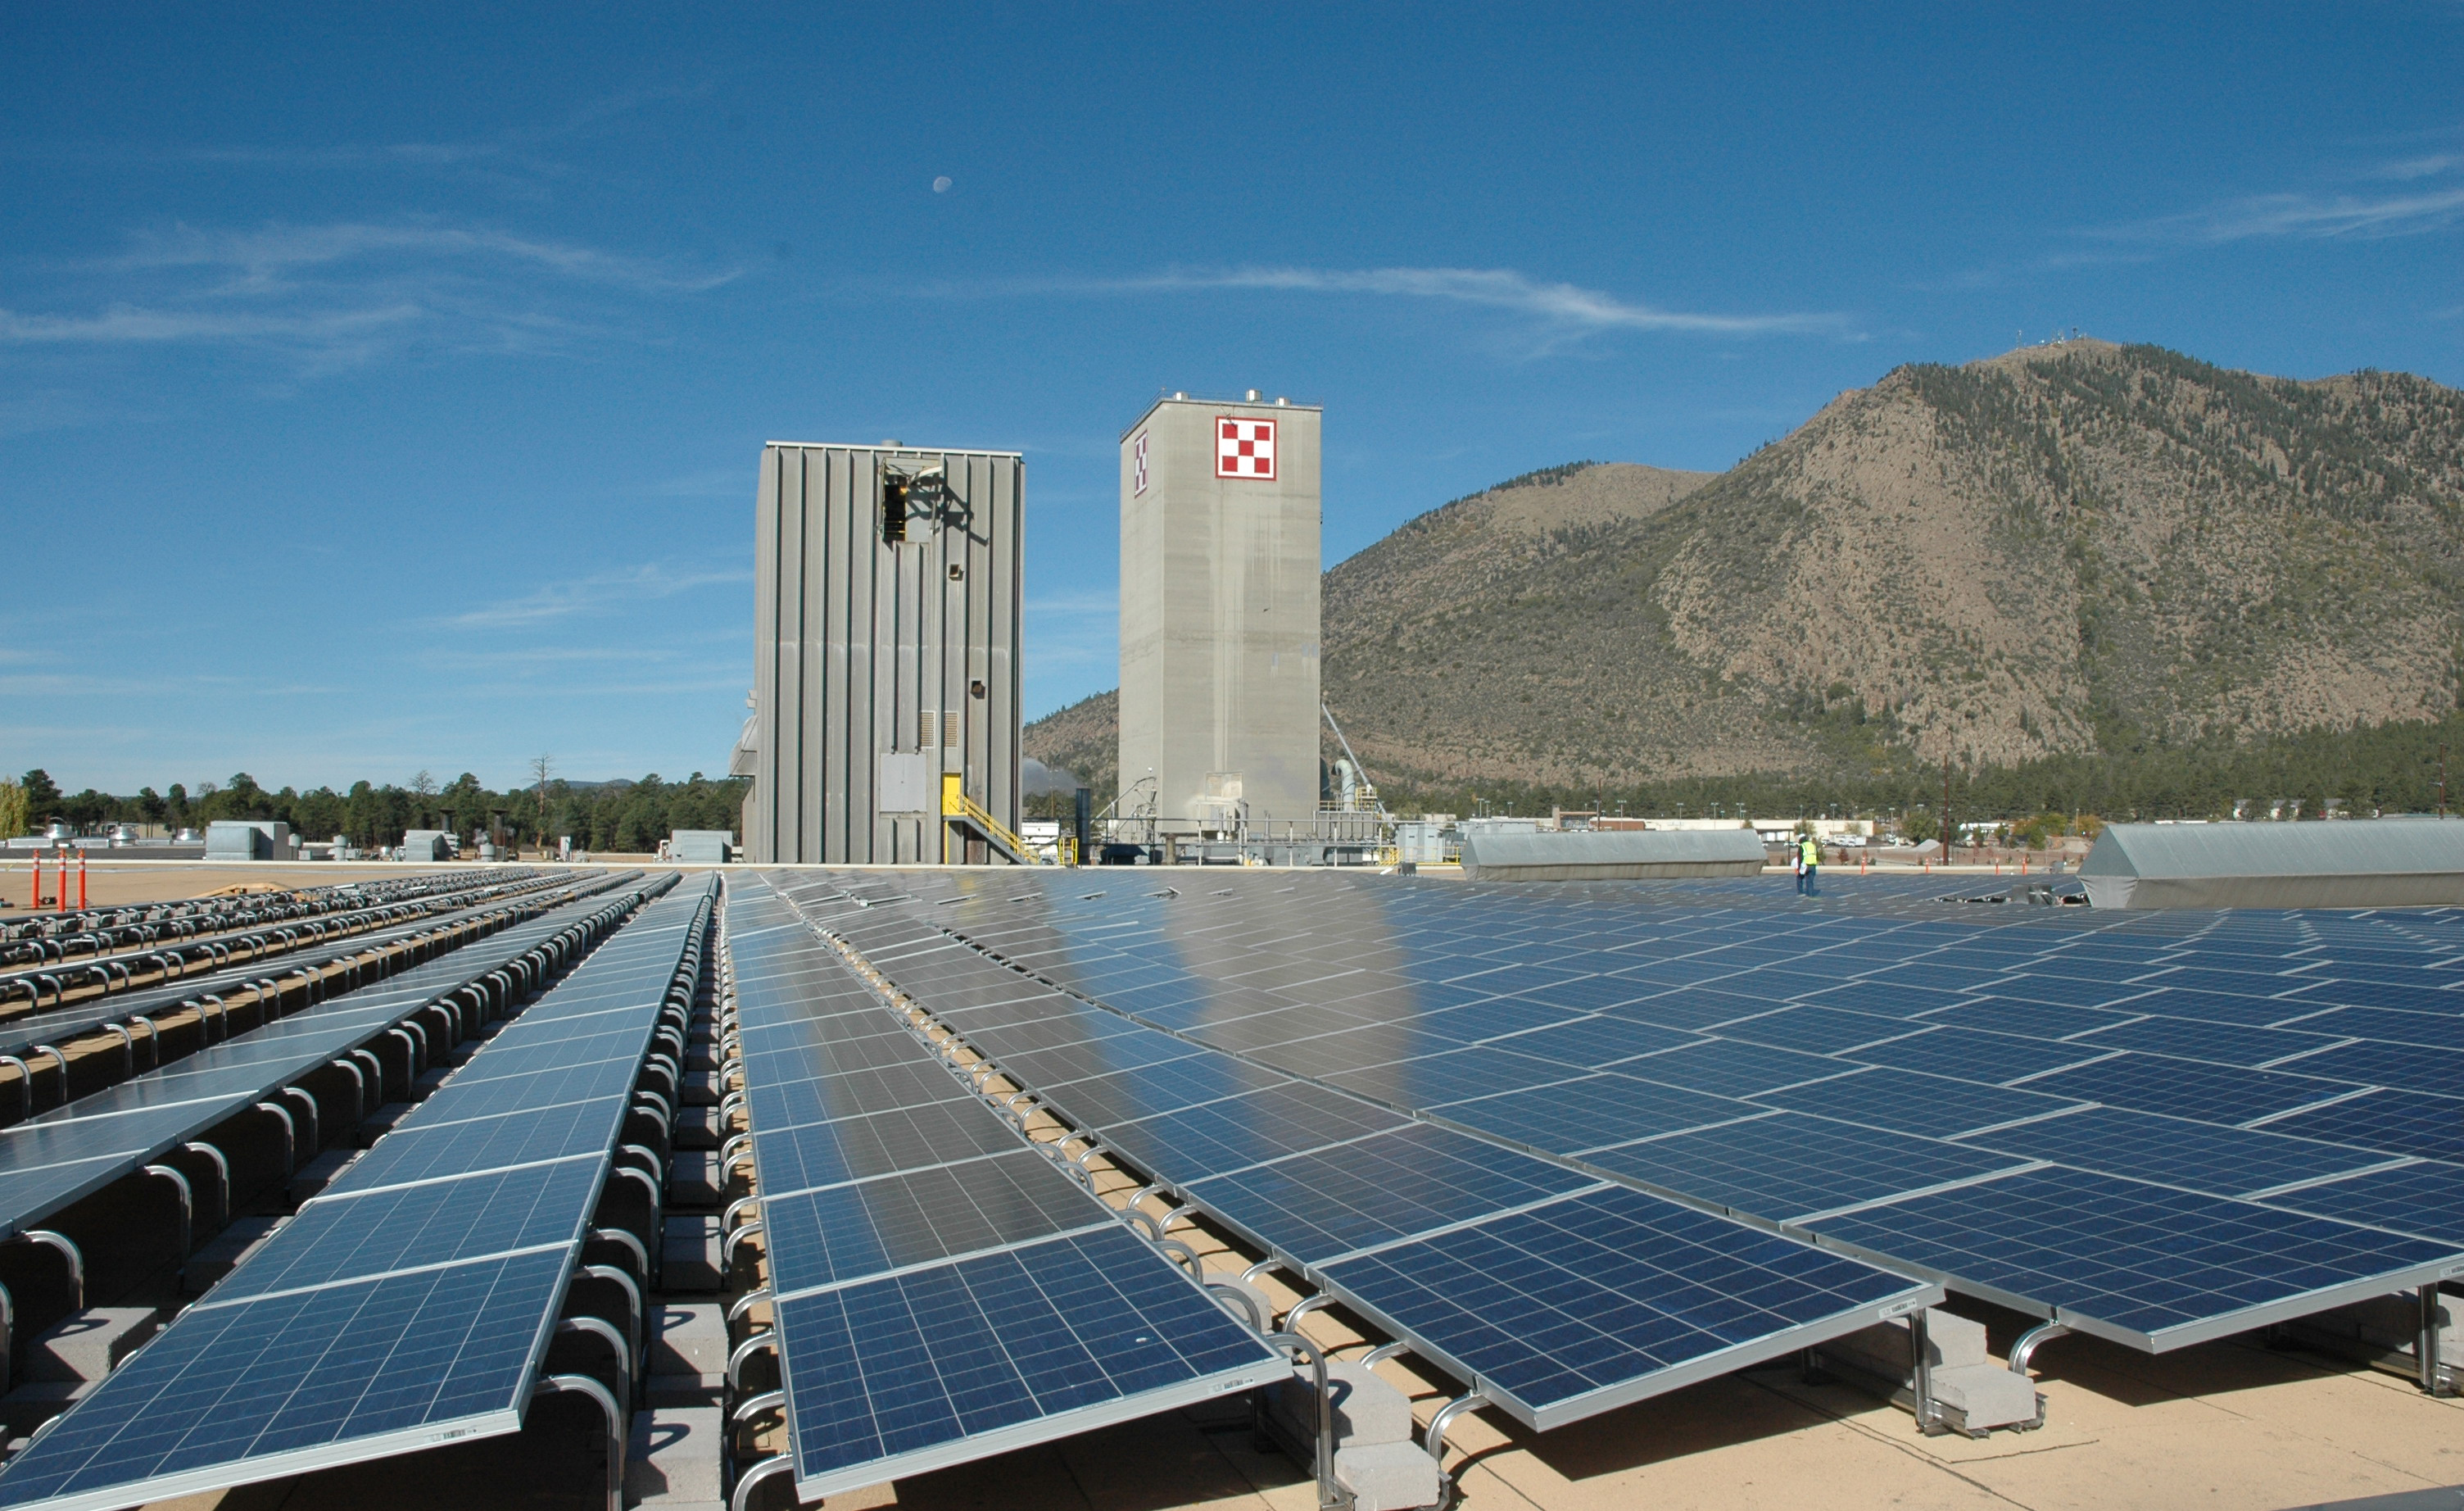 Business leaders want Arizona to leverage clean energy technologies